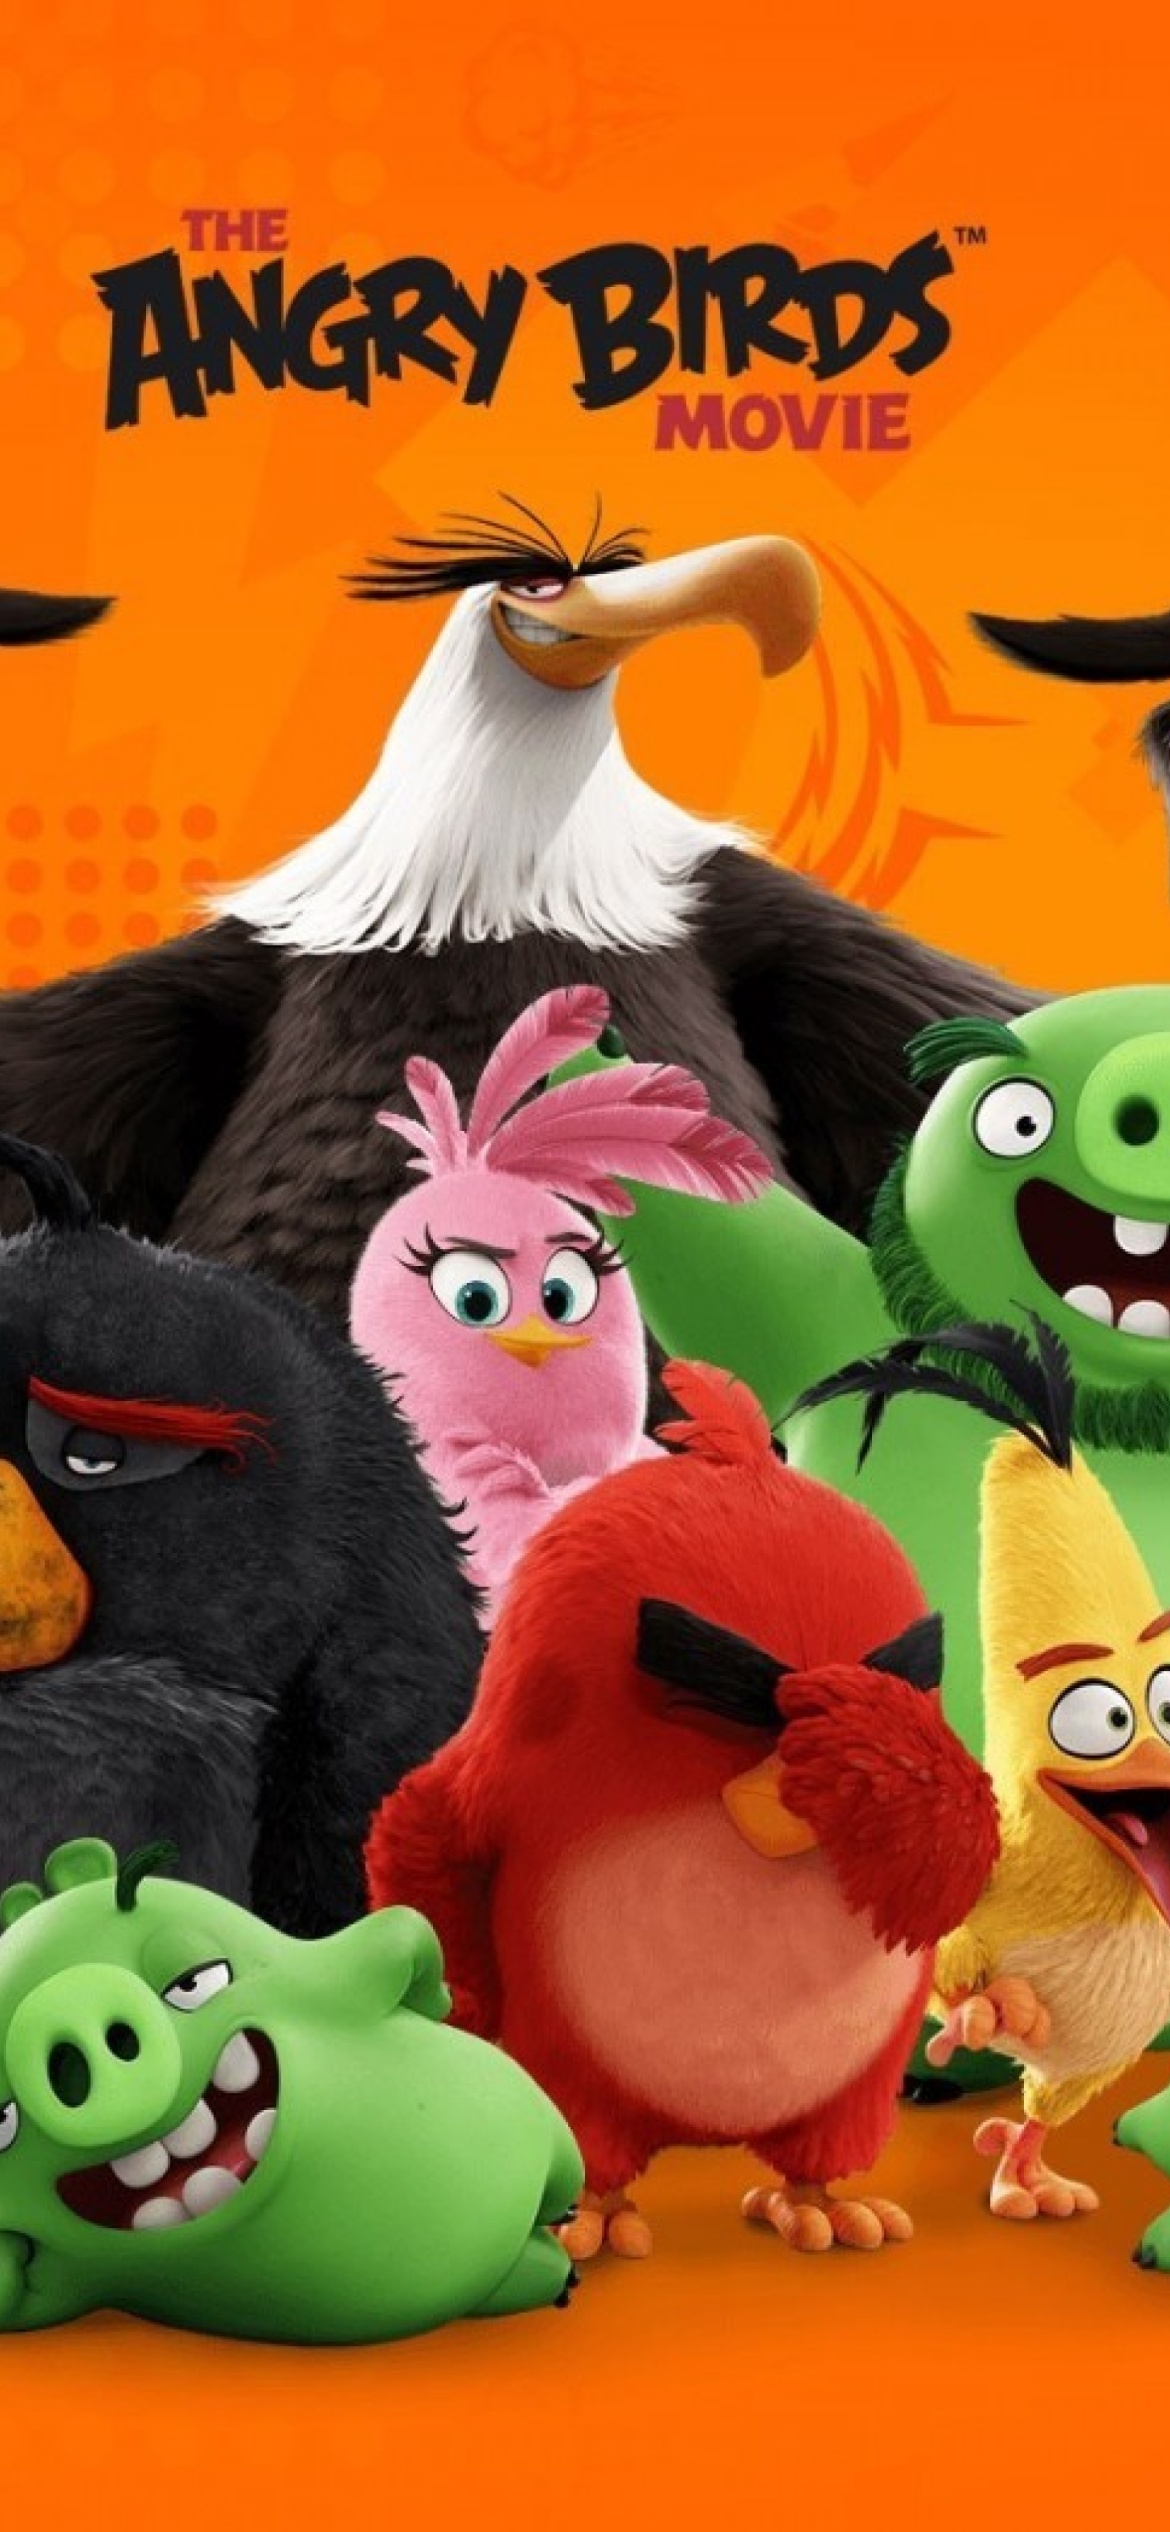 Das Angry Birds the Movie Release by Rovio Wallpaper 1170x2532